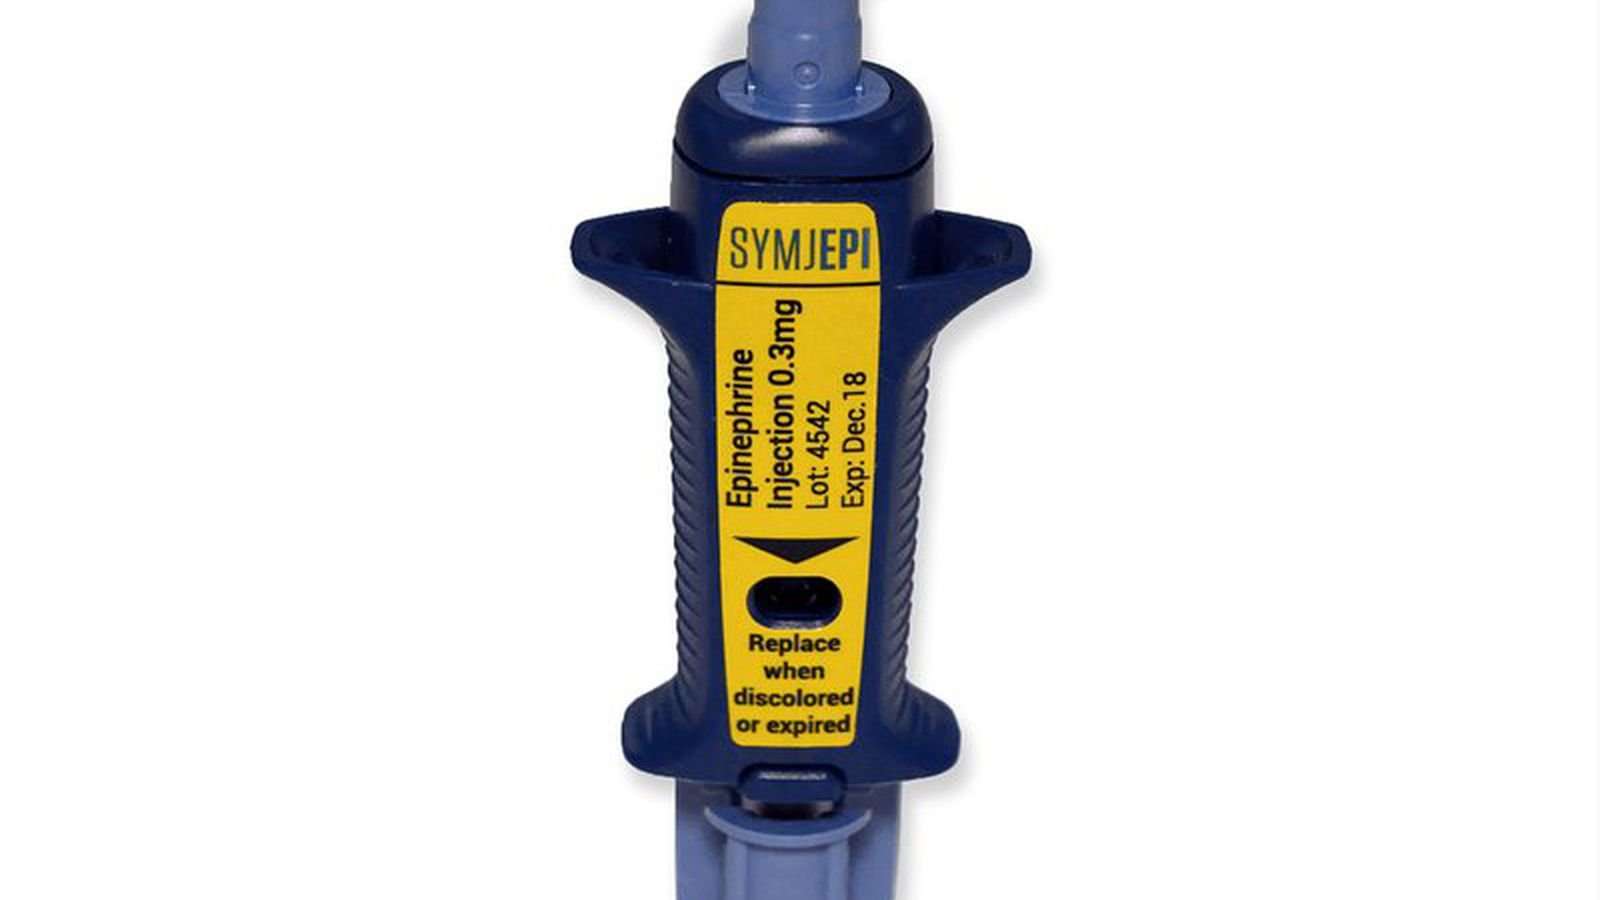 image for Cheaper alternative to EpiPen allergy shot approved by FDA